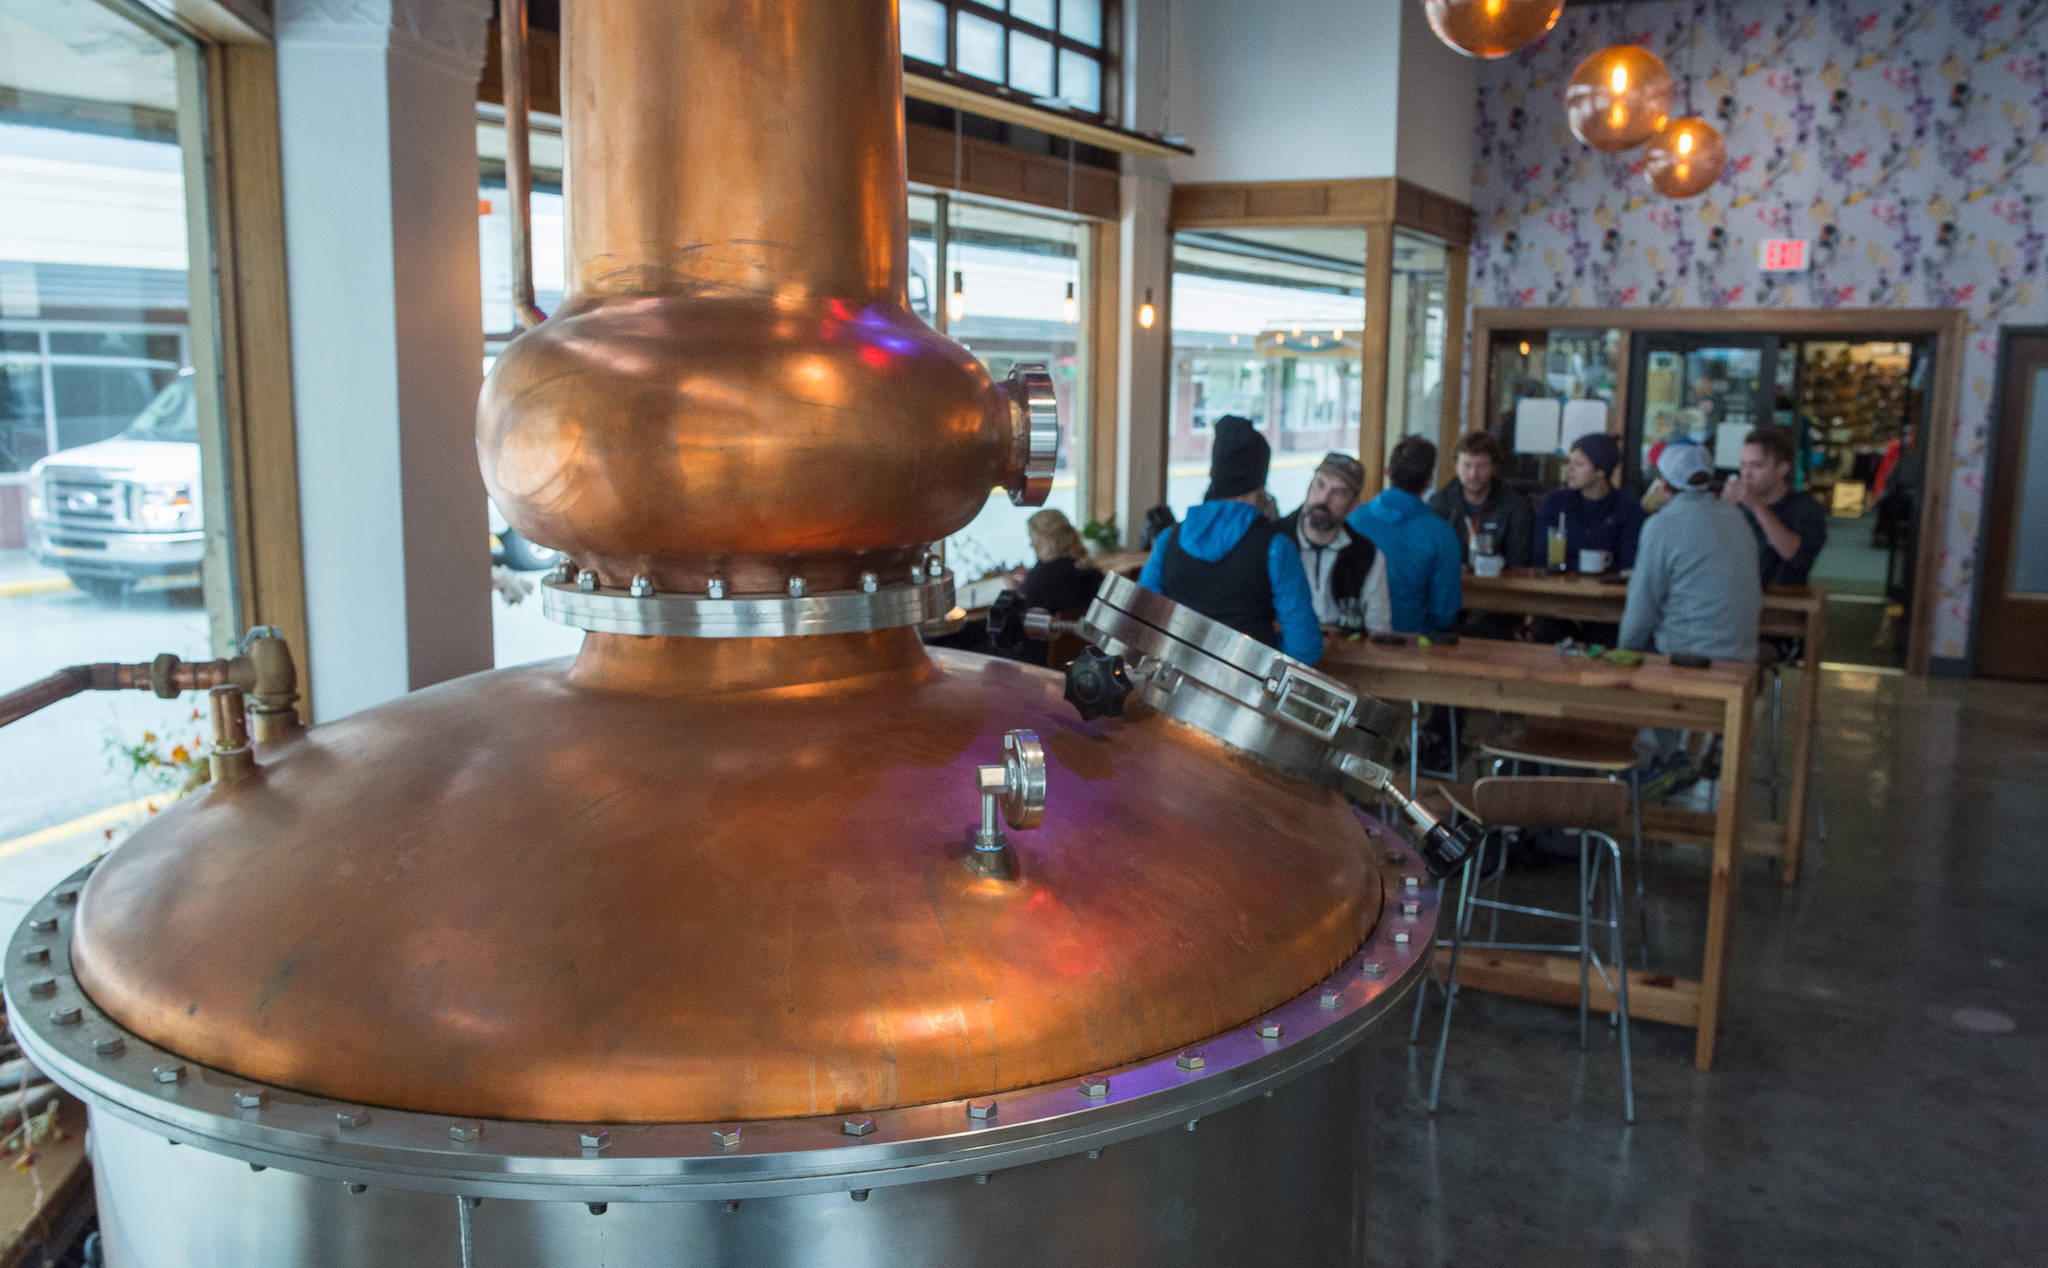 A large still is a centerpiece in the tasting room at the Amalga Distillery at Franklin and Second Streets on Thursday, Sept. 14, 2017. (Michael Penn | Juneau Empire)